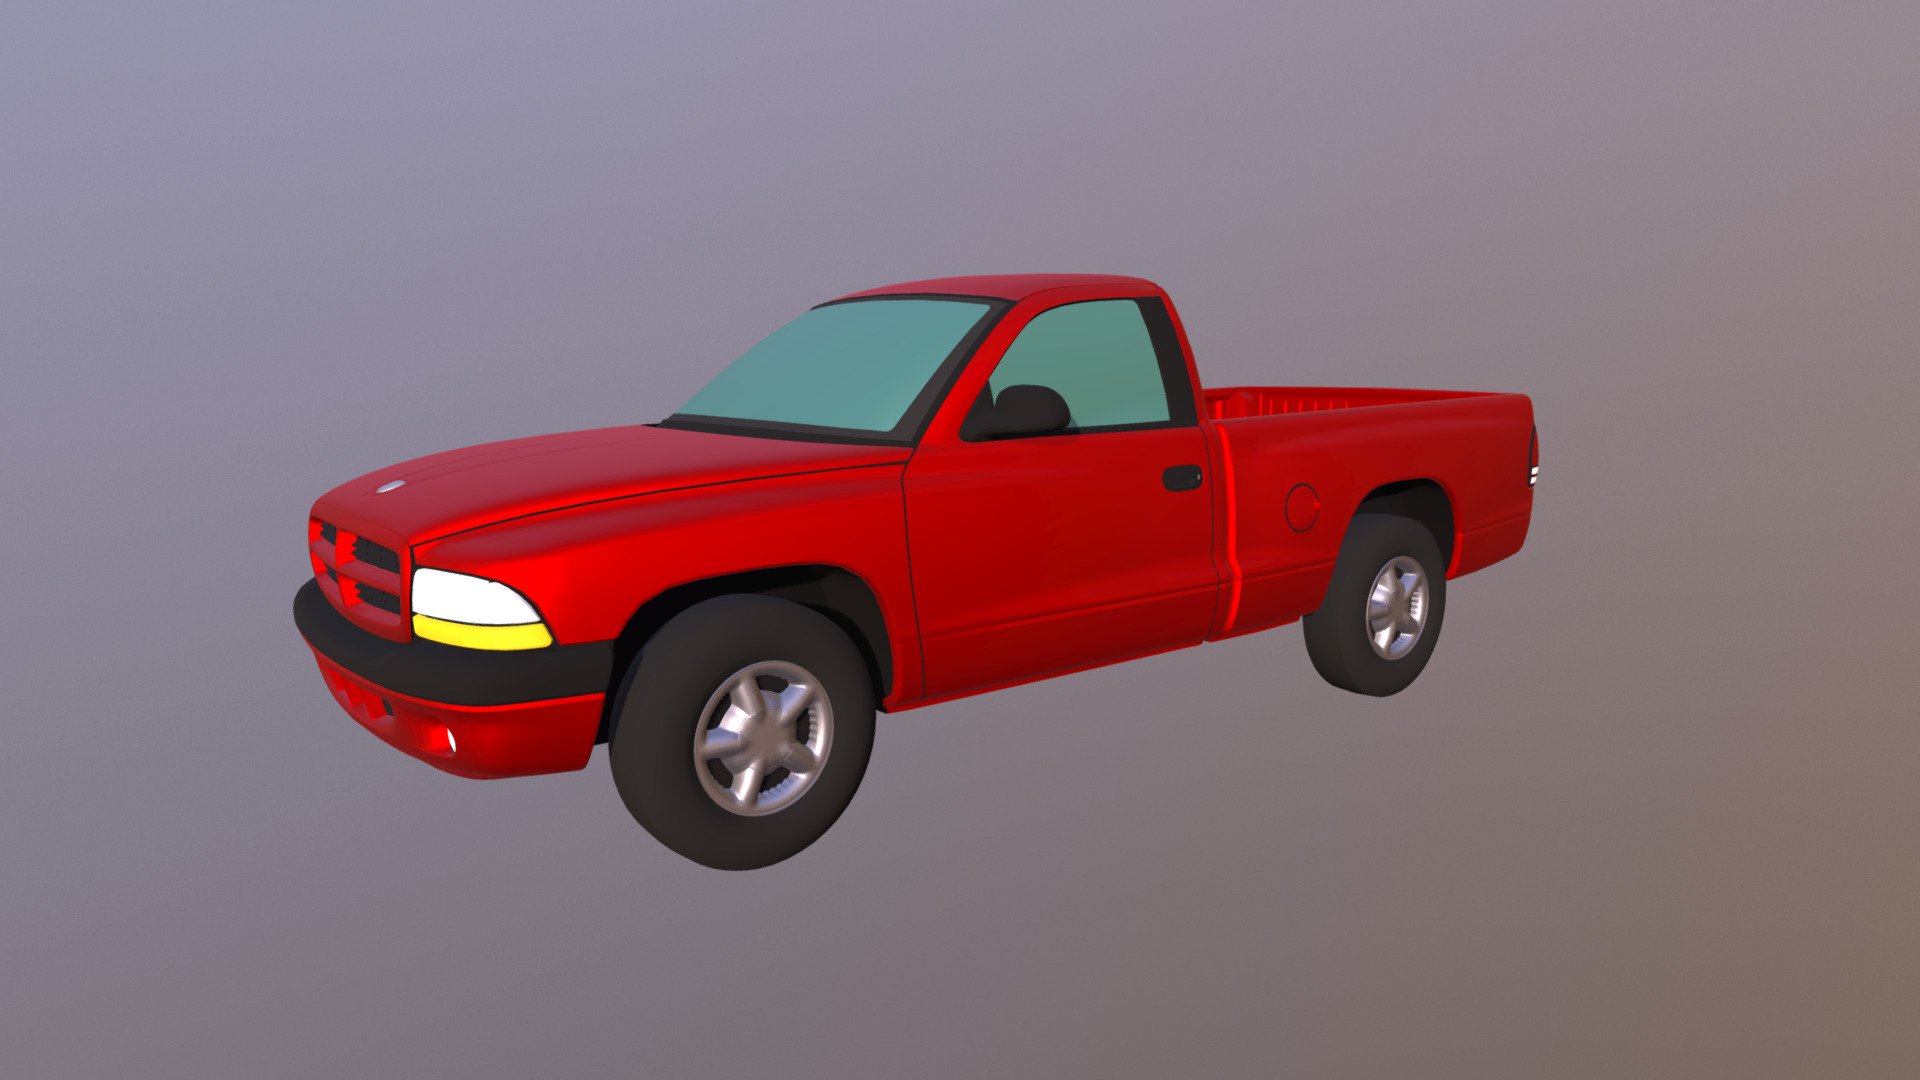 This digital model is based on the 1997 version of the Dodge Dakota Pickup truck.




Approx 37899 polygons.

Made entirely with 3 and 4 point polygons.

Does not have an interior cabin, so we recommend darkening the windows.

Because of this, the doors are not separate parts.

Includes group information for all 4 wheels which your software should interpret as separate parts.

Although the model includes these parts, this version of the model is not rigged.

Includes logically named materials, such as BodyMetal, Tires, Headlight Glass, and more. This makes it very easy to recolor the model.

This version includes an mtl file, which your software program should read to colorize the model.

The model has basic UV mapping and NO textures are included. You'll need to apply your own shaders, such as metal and fabric.

Model by Digimation and uploaded for sale here with permission 3d model